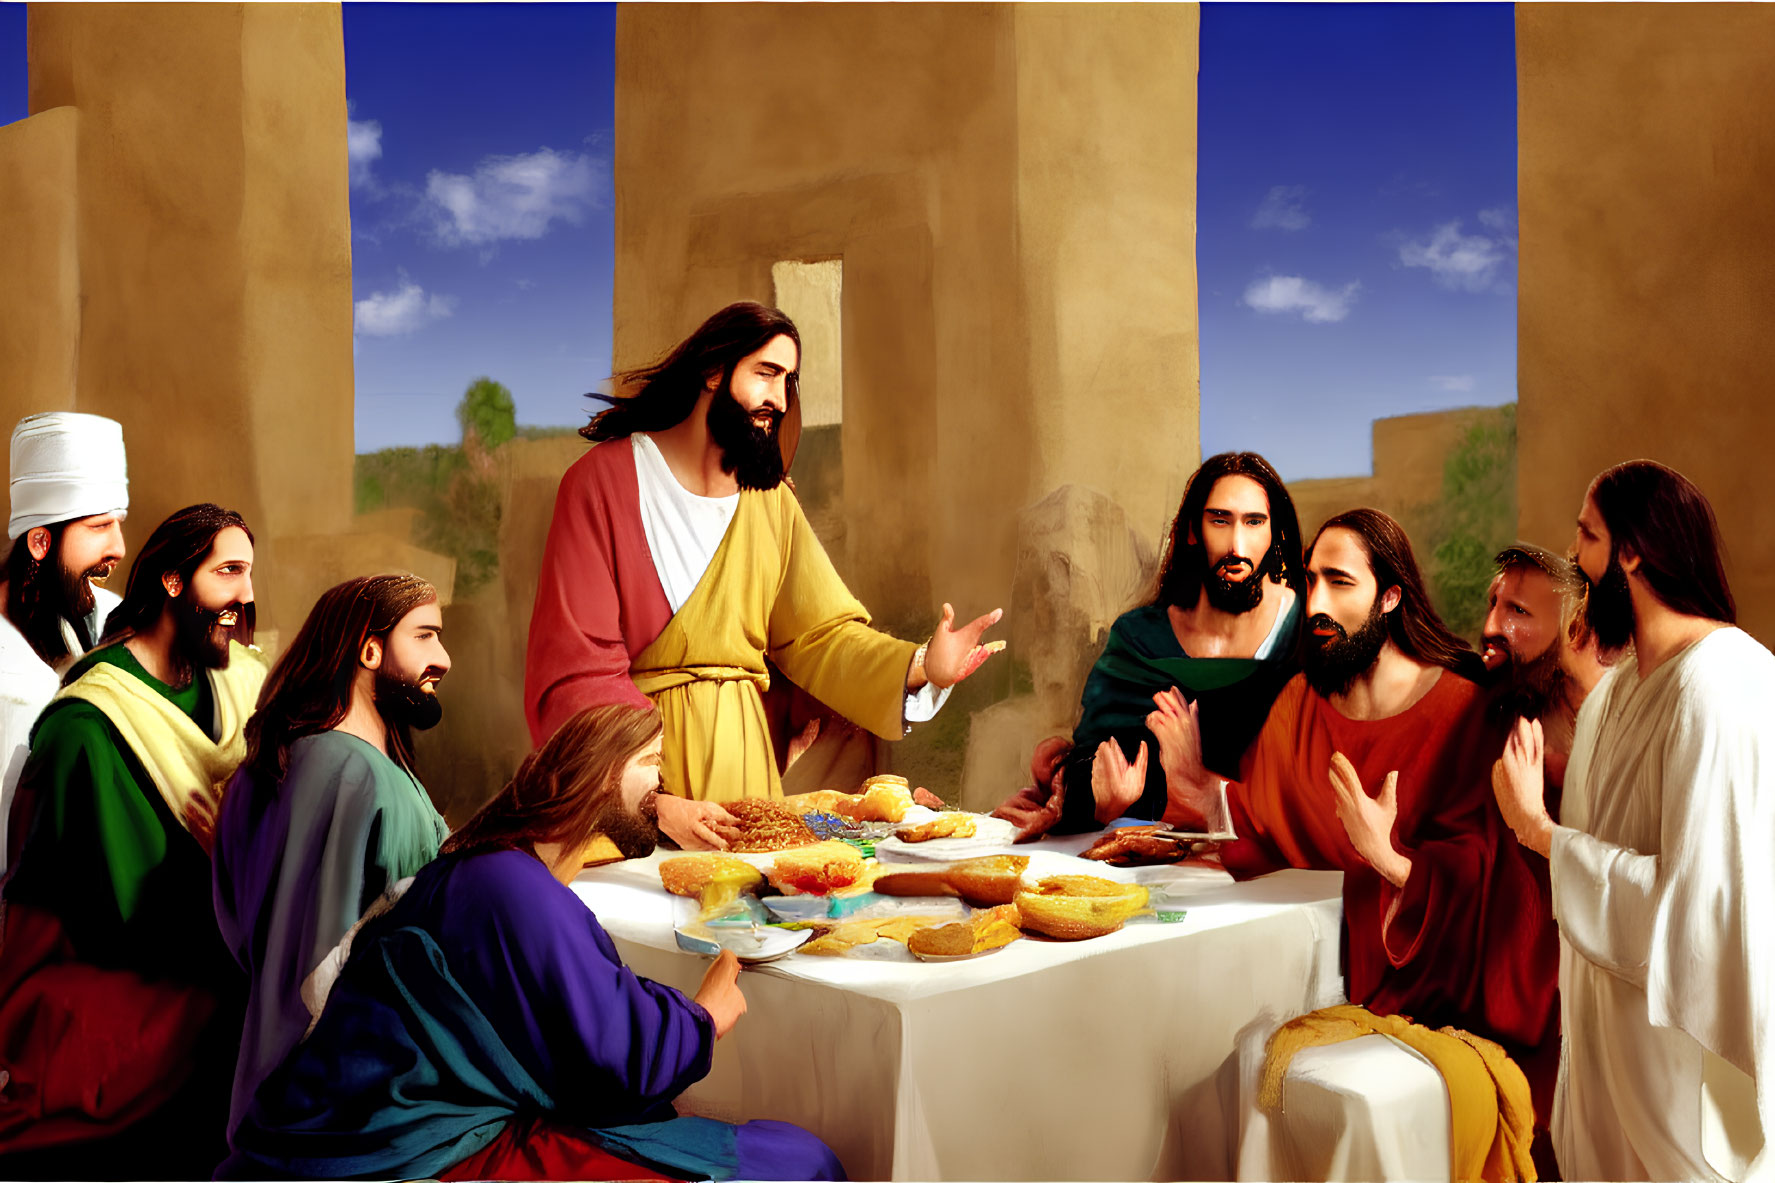 Vibrant biblical scene: Jesus and disciples share meal and conversation